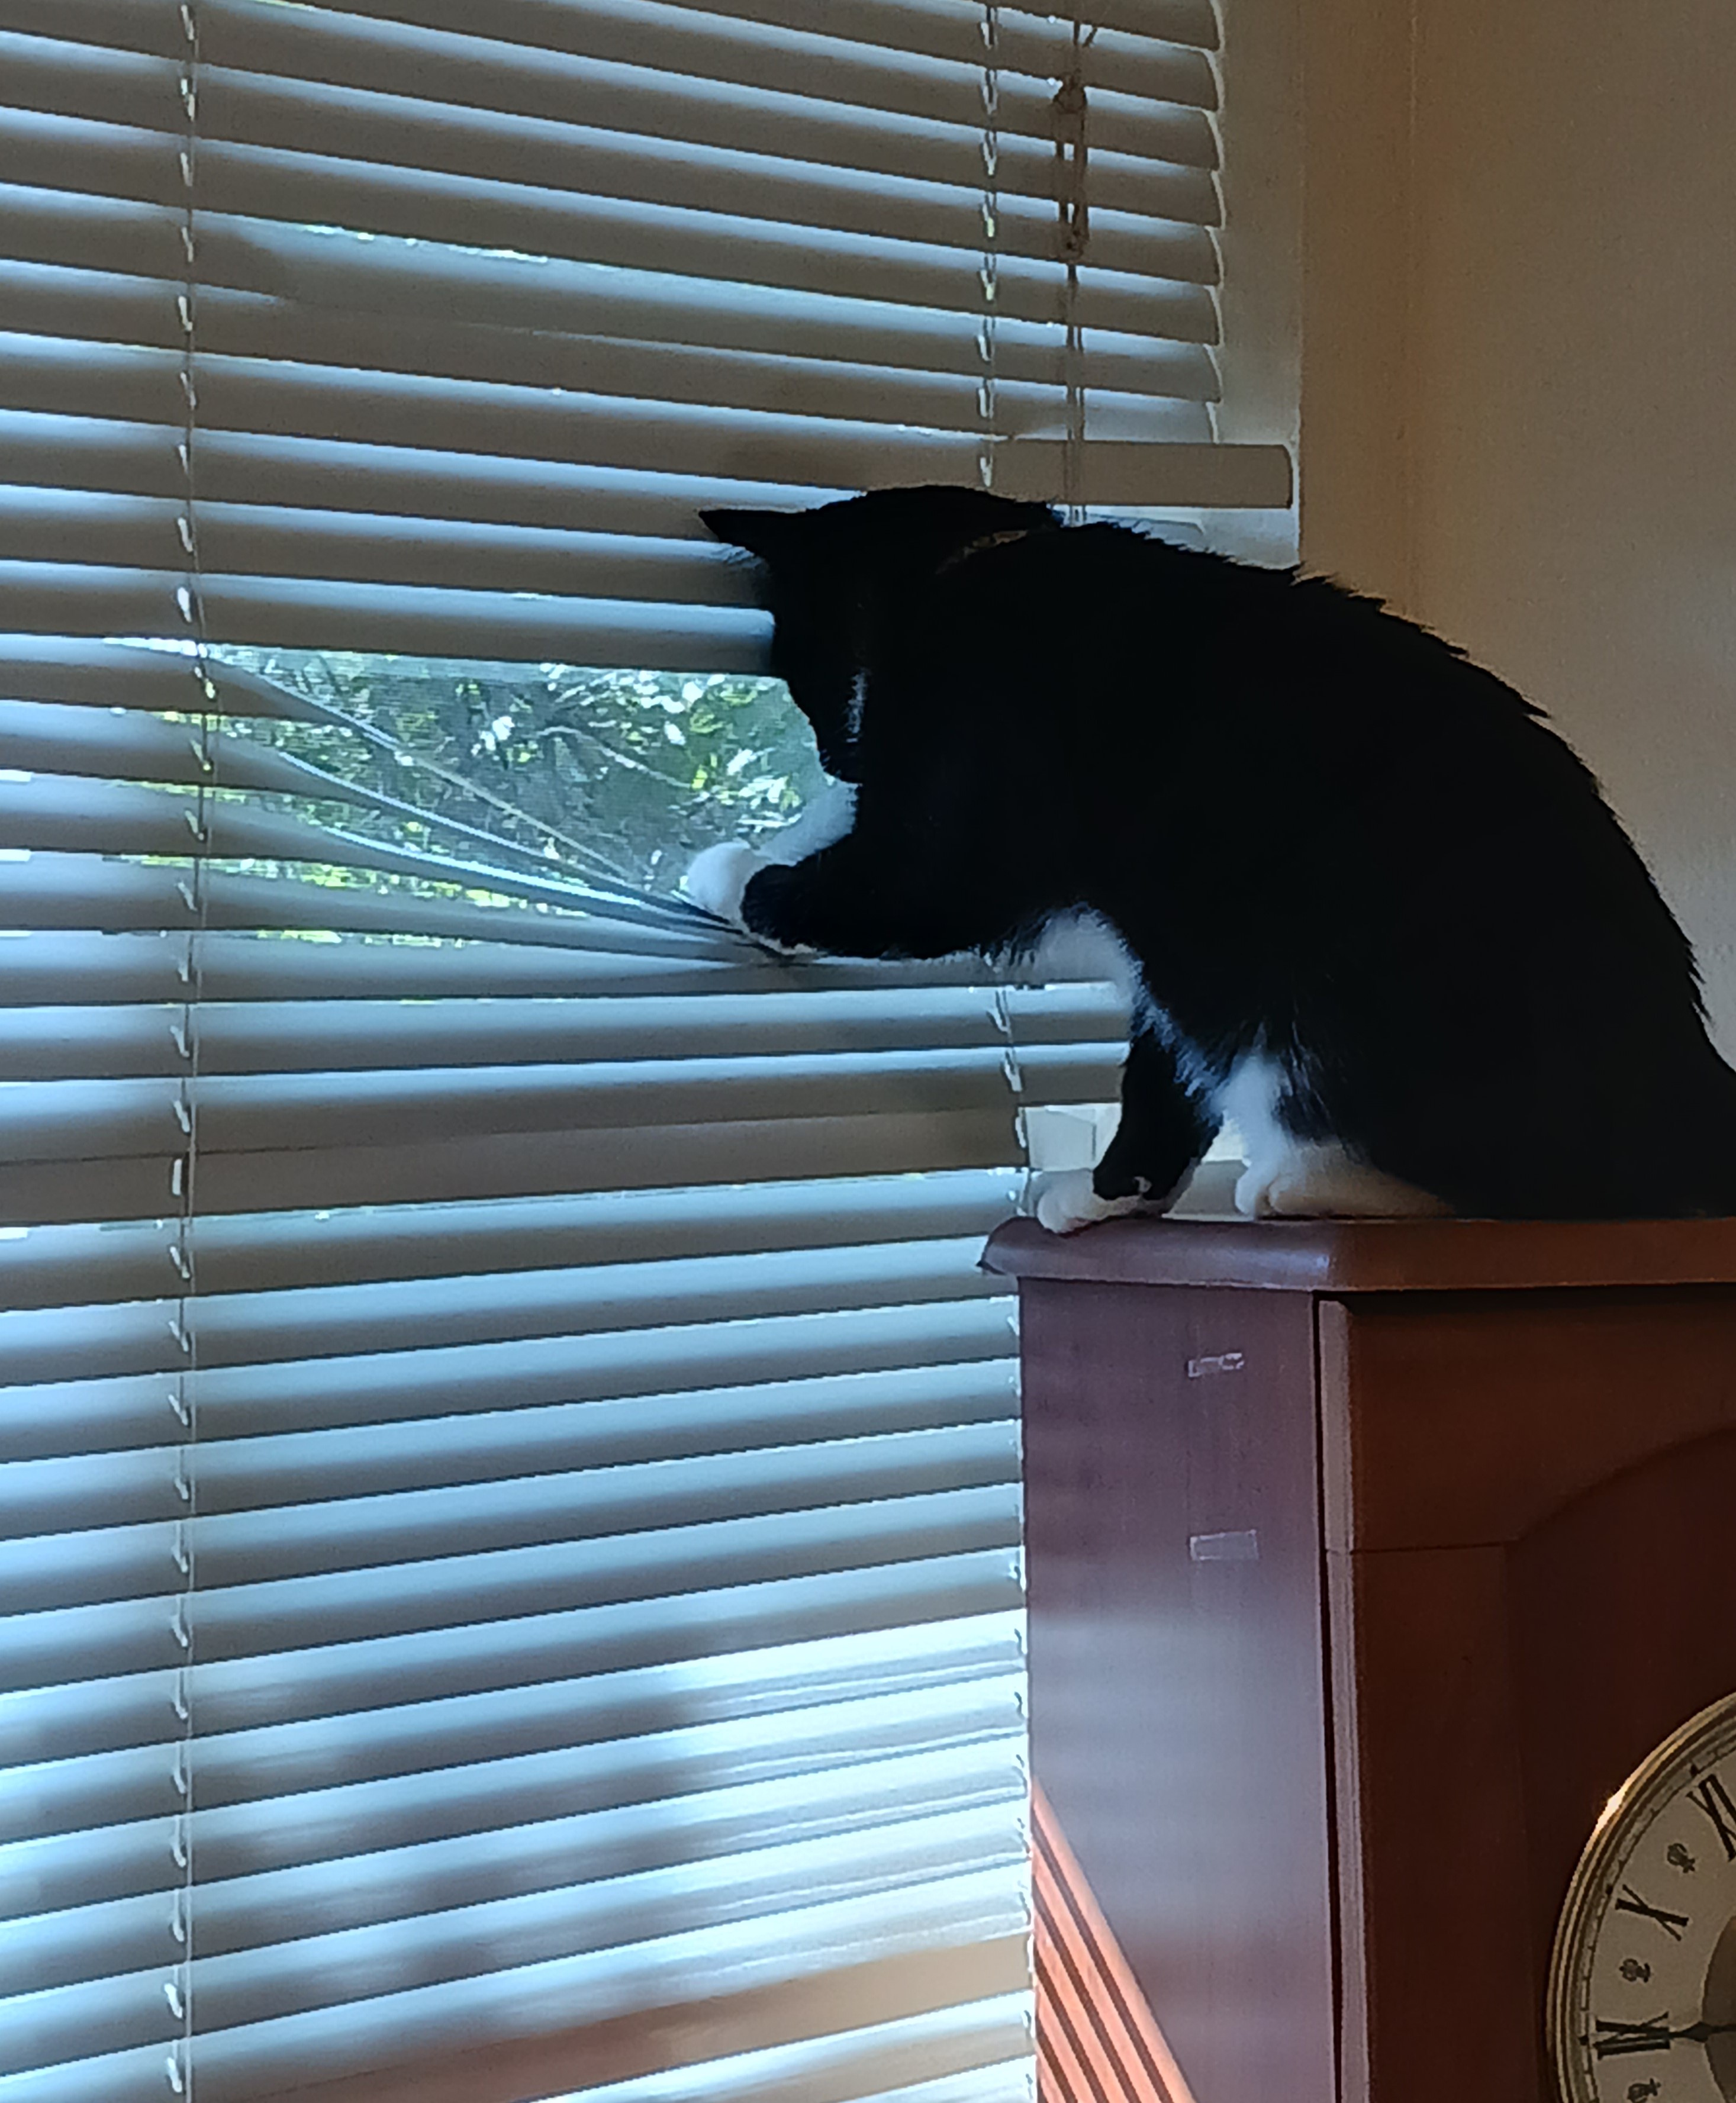 Photo of a black cat with white paws, sitting atop a clock cabinet and peering out of the window through the white window blinds.